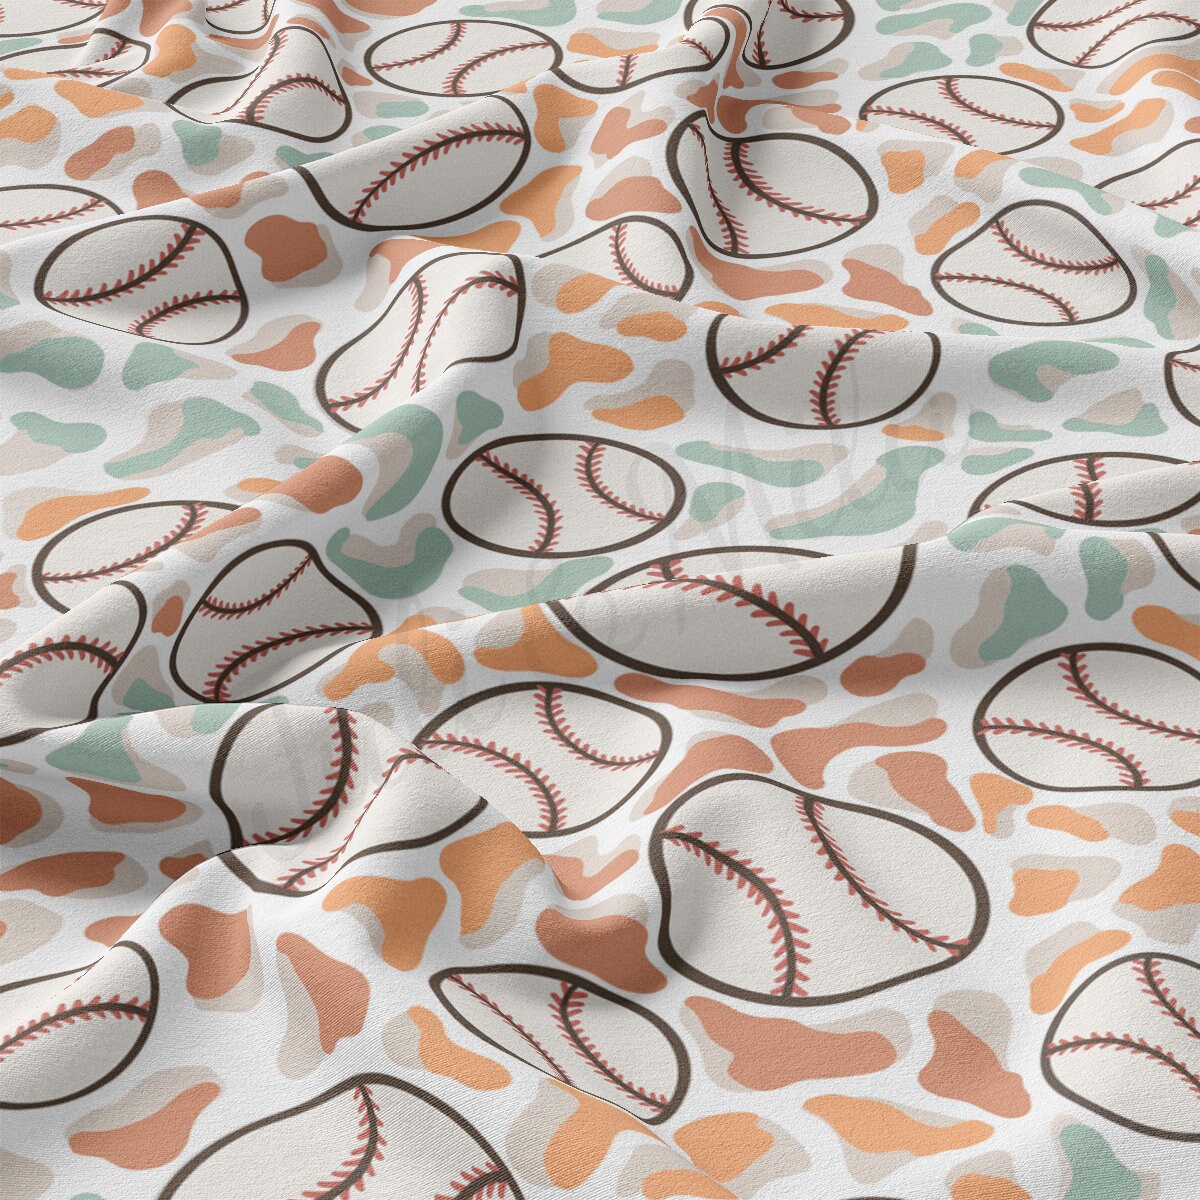 DBP Fabric Double Brushed Polyester DBP2510 Baseball